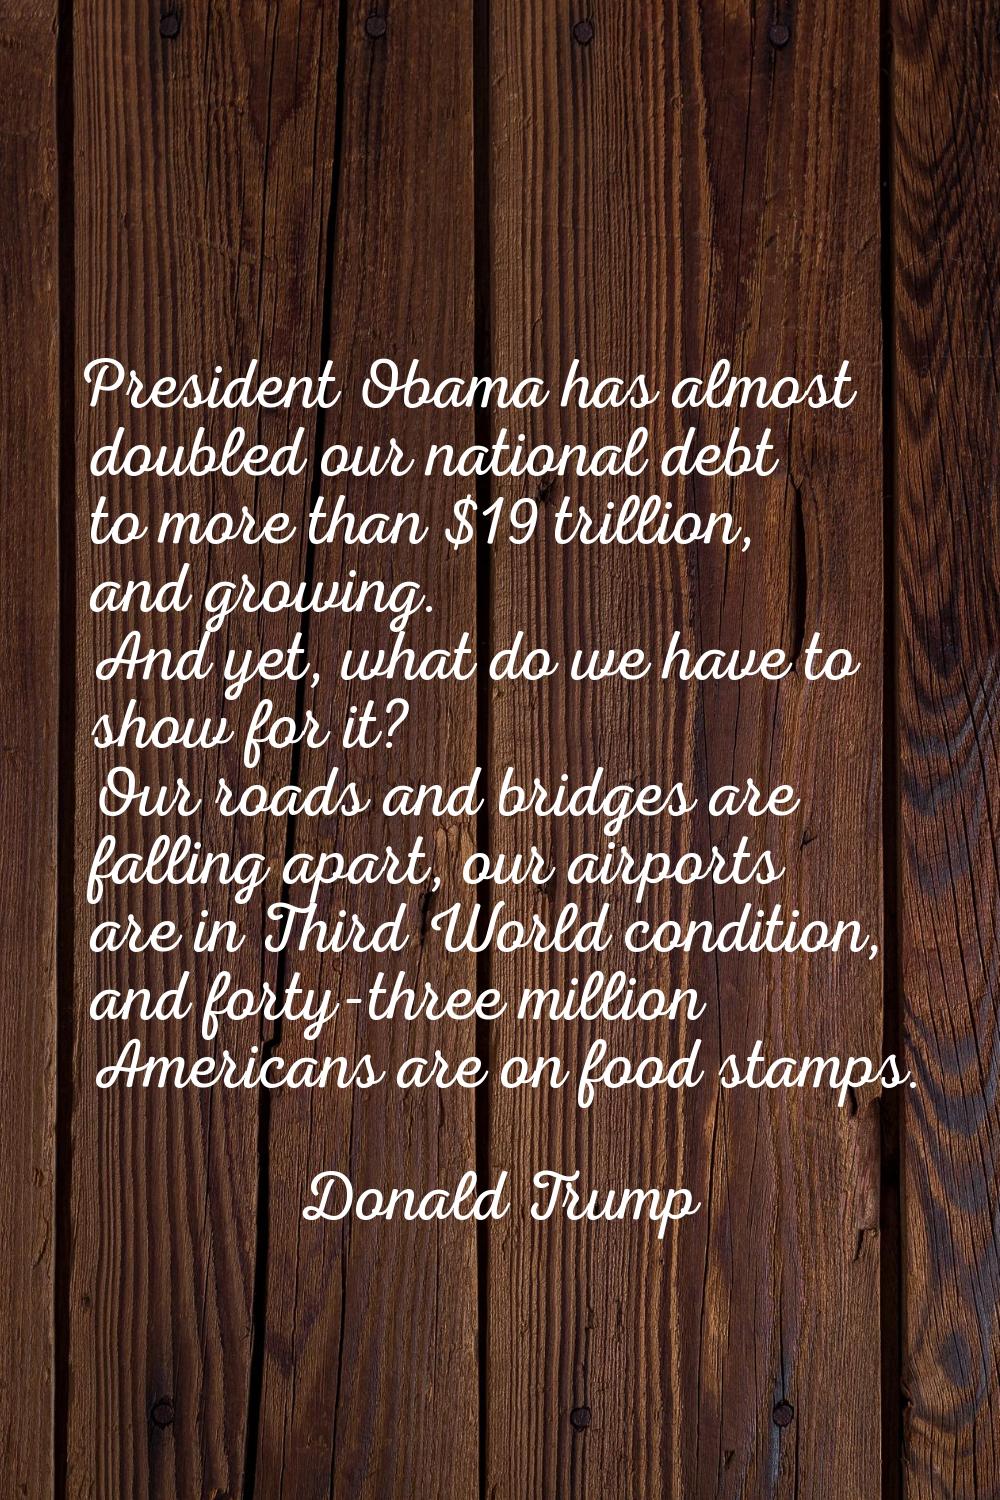 President Obama has almost doubled our national debt to more than $19 trillion, and growing. And ye